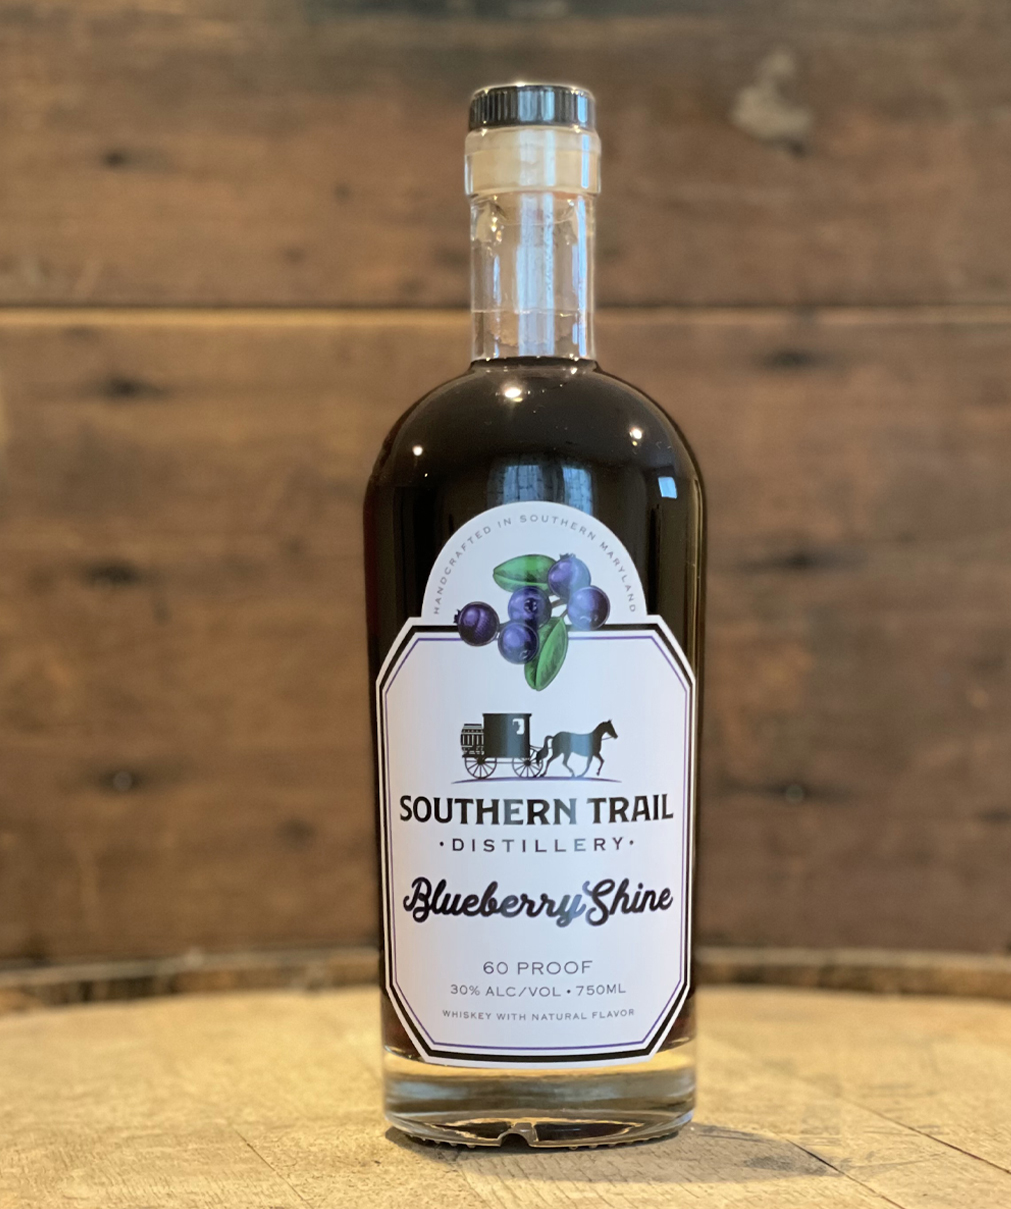 Blueberry Shine Southern Trail Distillery